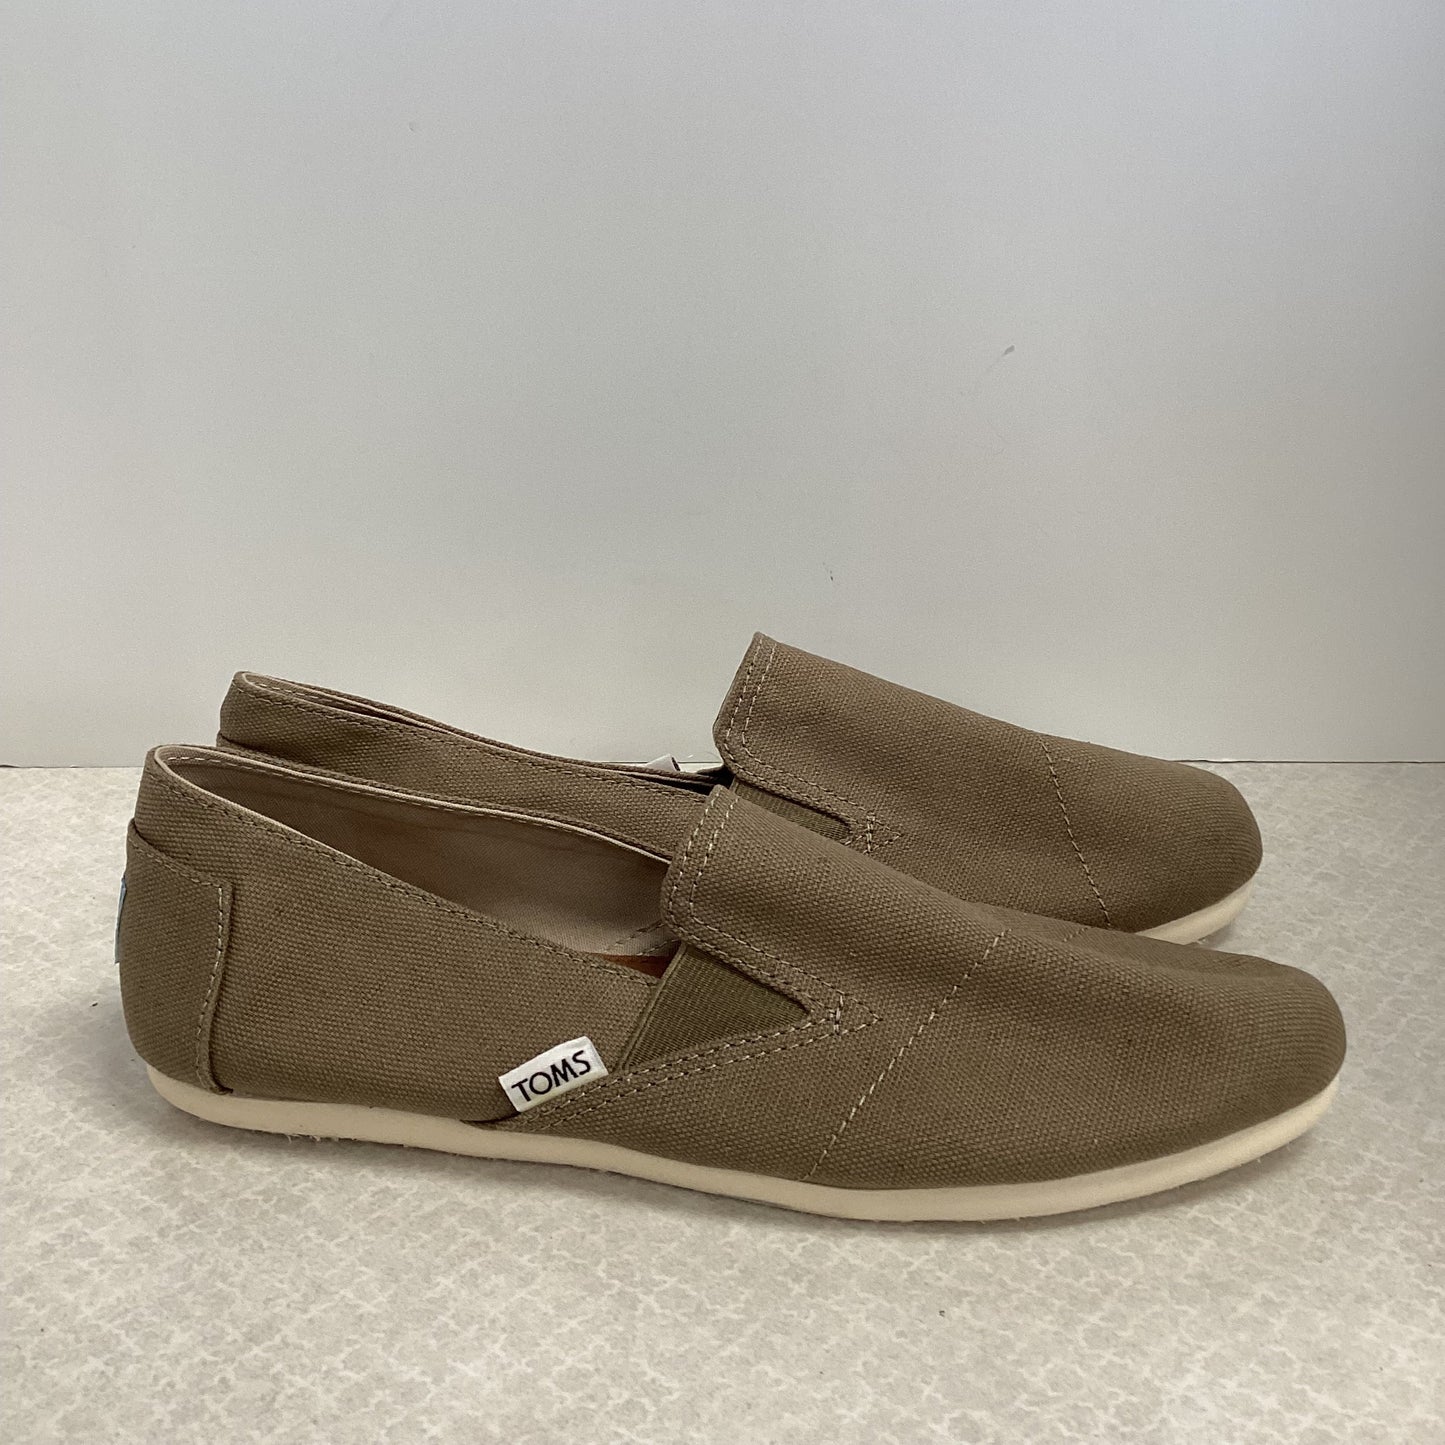 Brown Shoes Flats Toms, Size 9.5